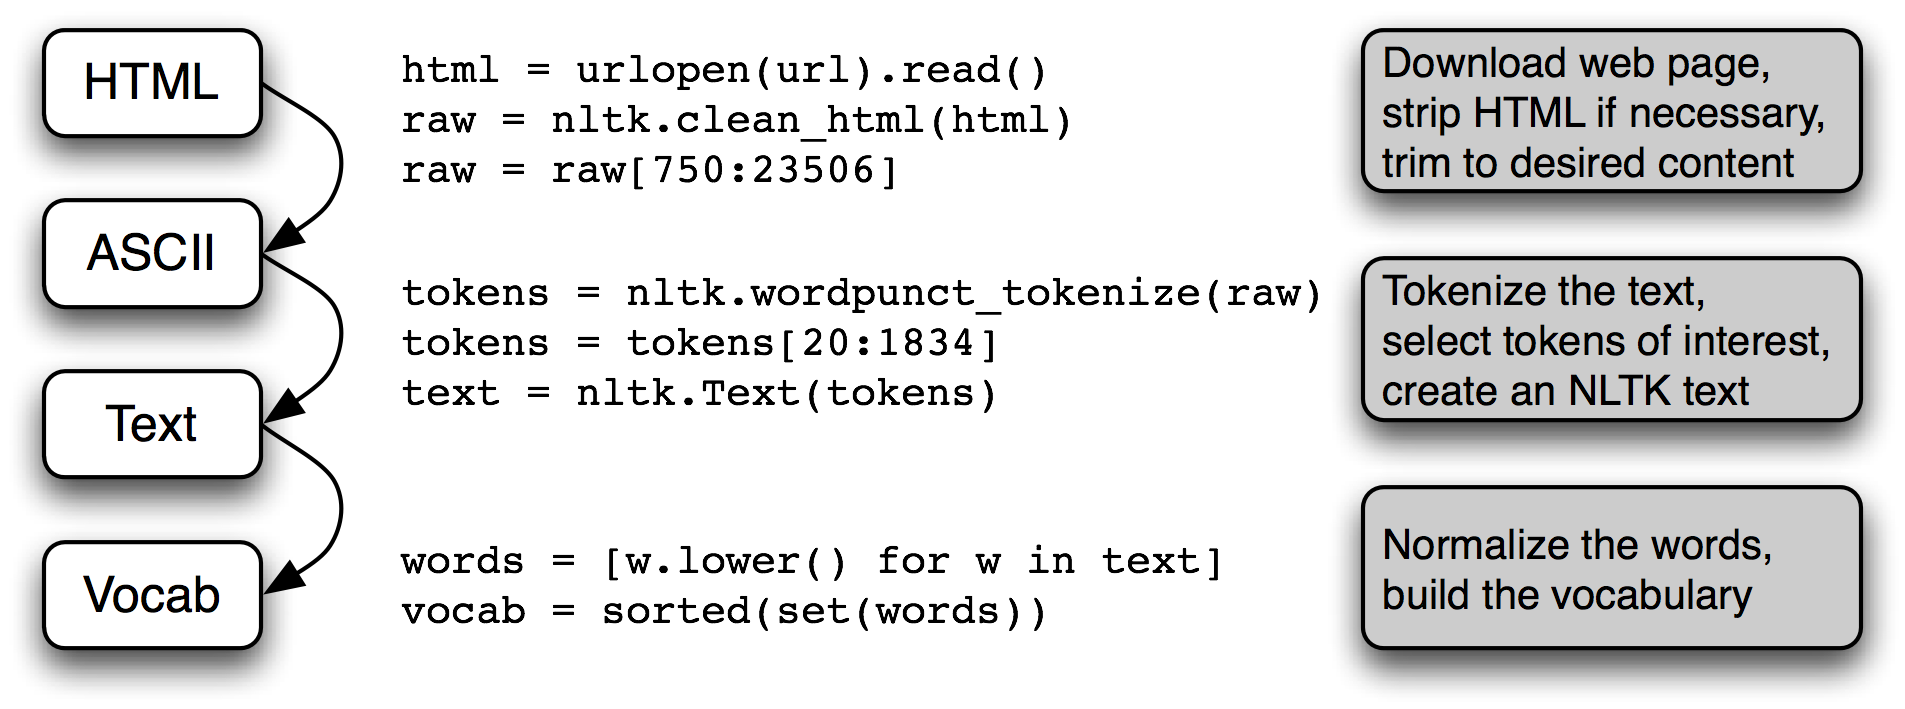 The Processing Pipeline: We open a URL and read its HTML content, remove the markup and select a slice of characters; this is then tokenized and optionally converted into an nltk.Text object; we can also lowercase all the words and extract the vocabulary.